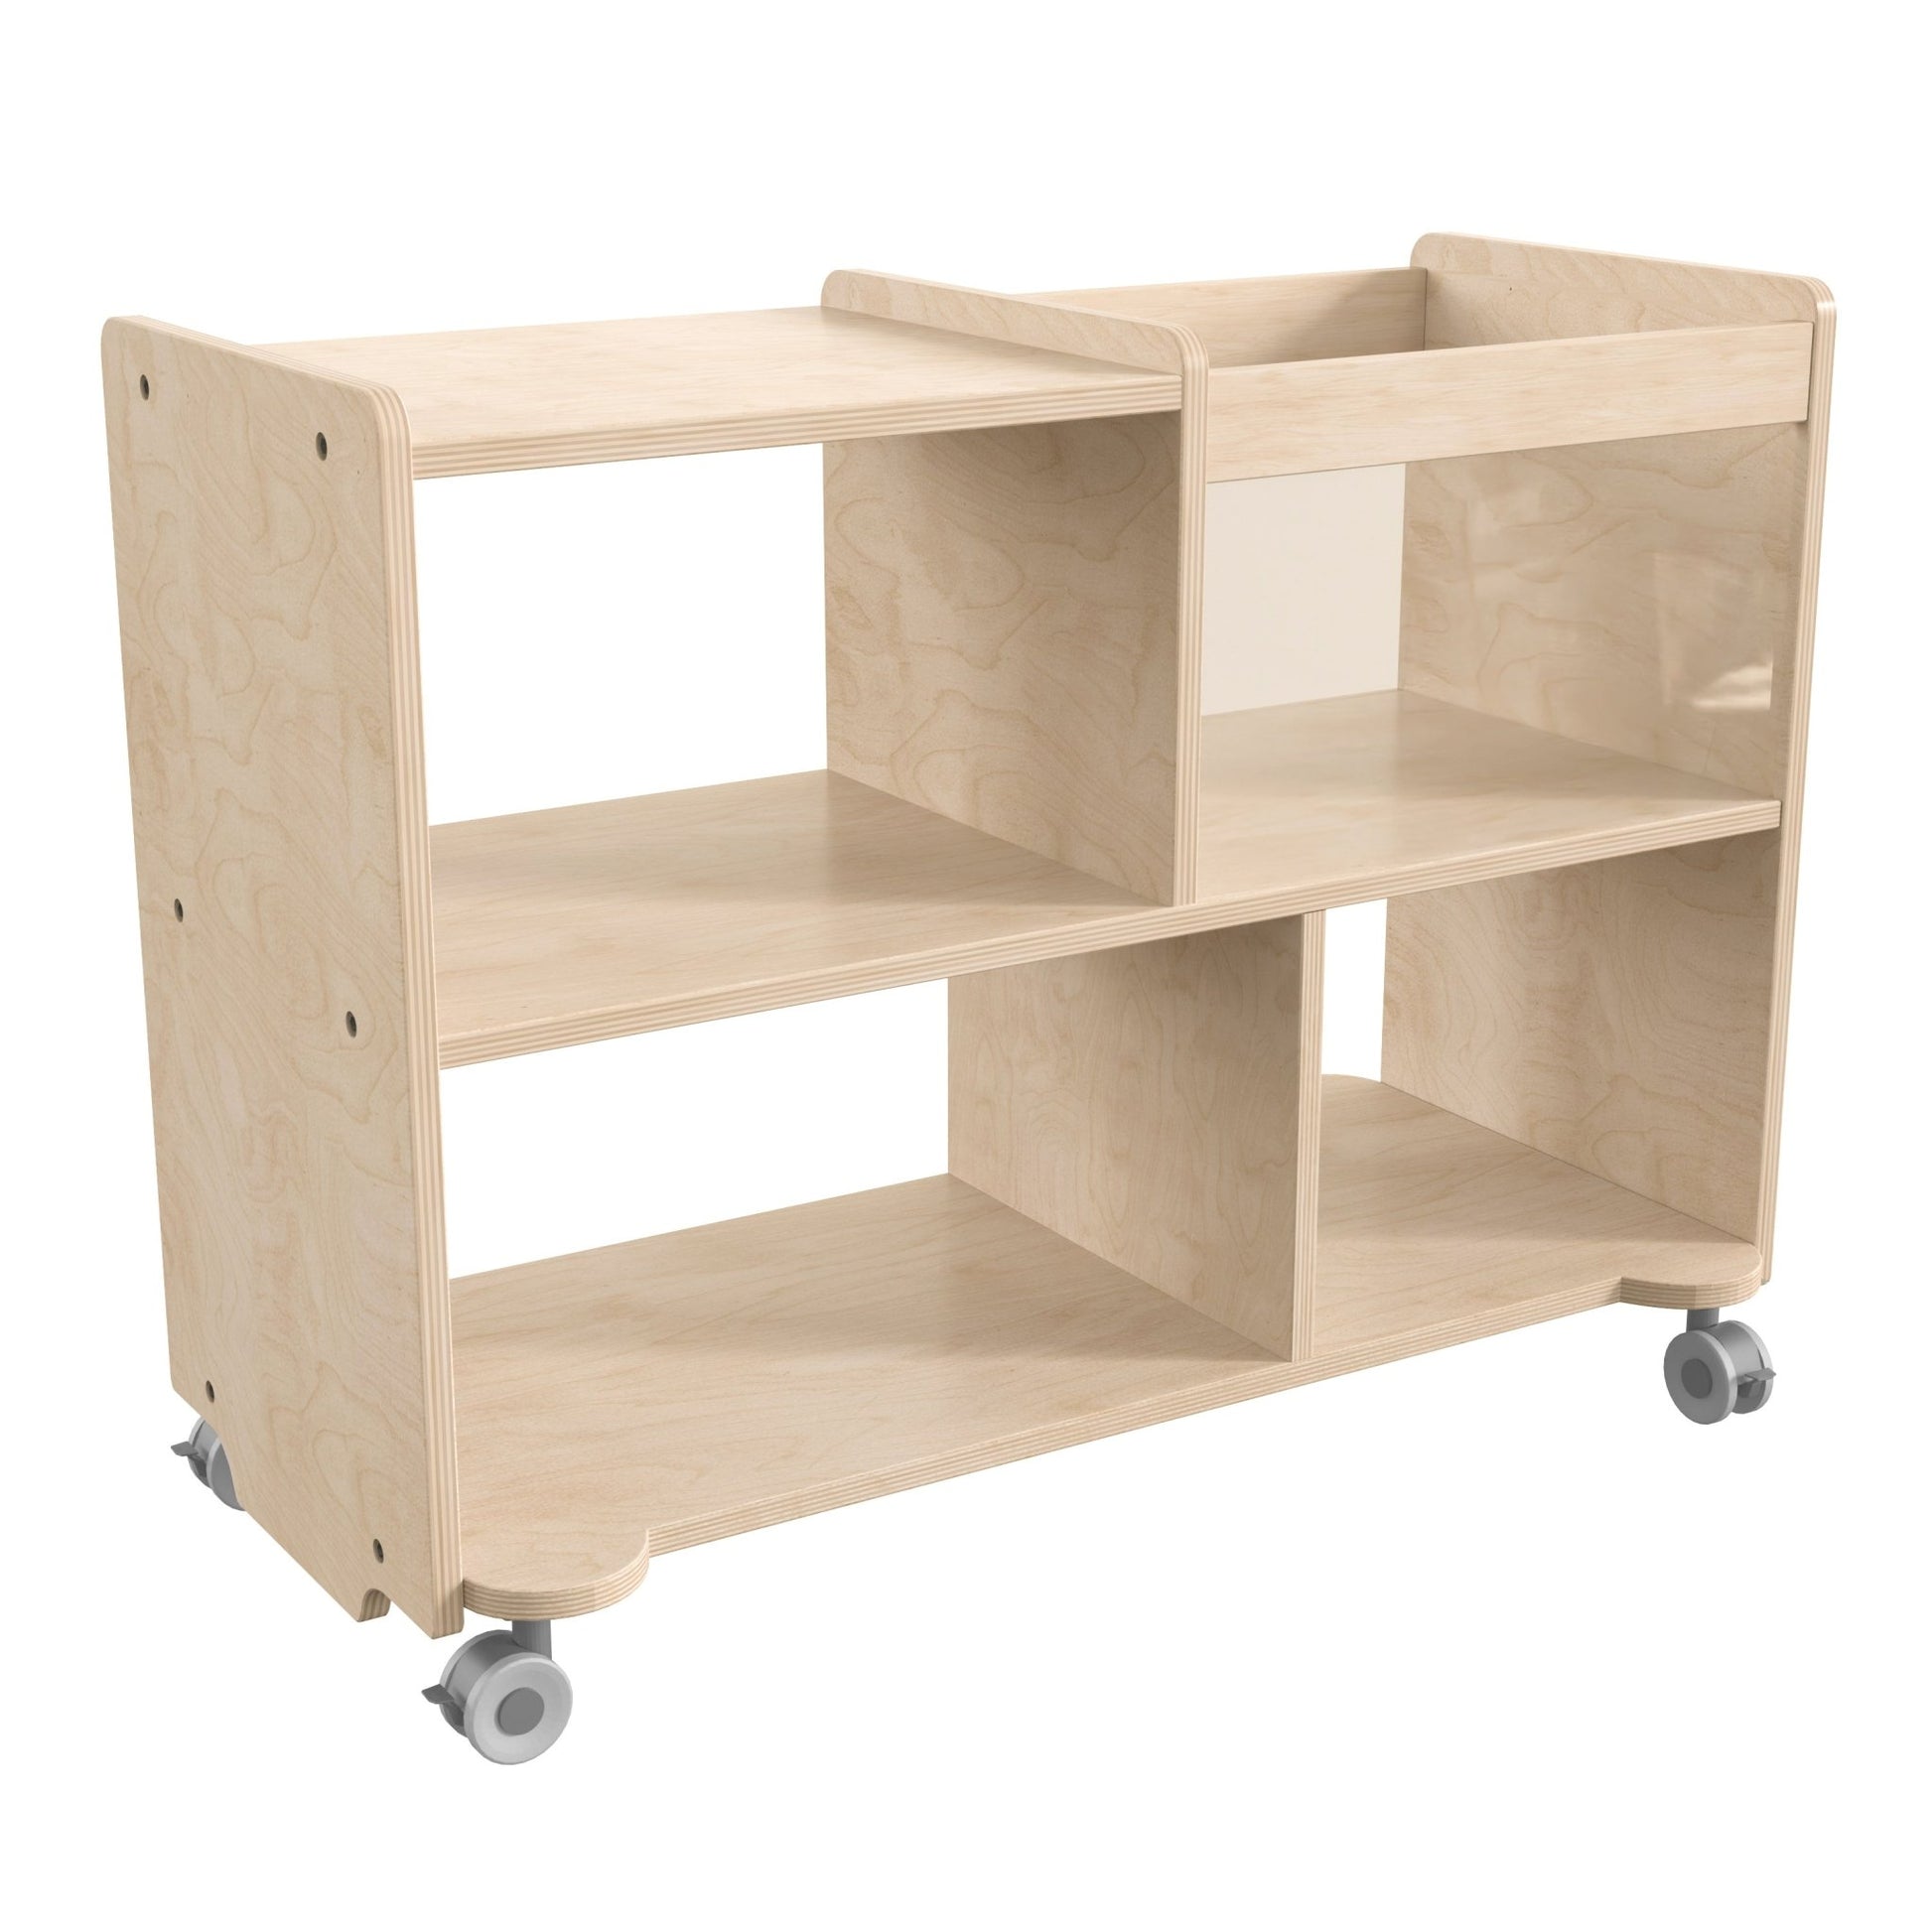 Bright Beginnings Commercial Double Sided Space Saving Wooden Mobile Storage Cart - Locking Casters, 4 Compartments, 1 Clear Bin, Lower Shelf, Natural - SchoolOutlet